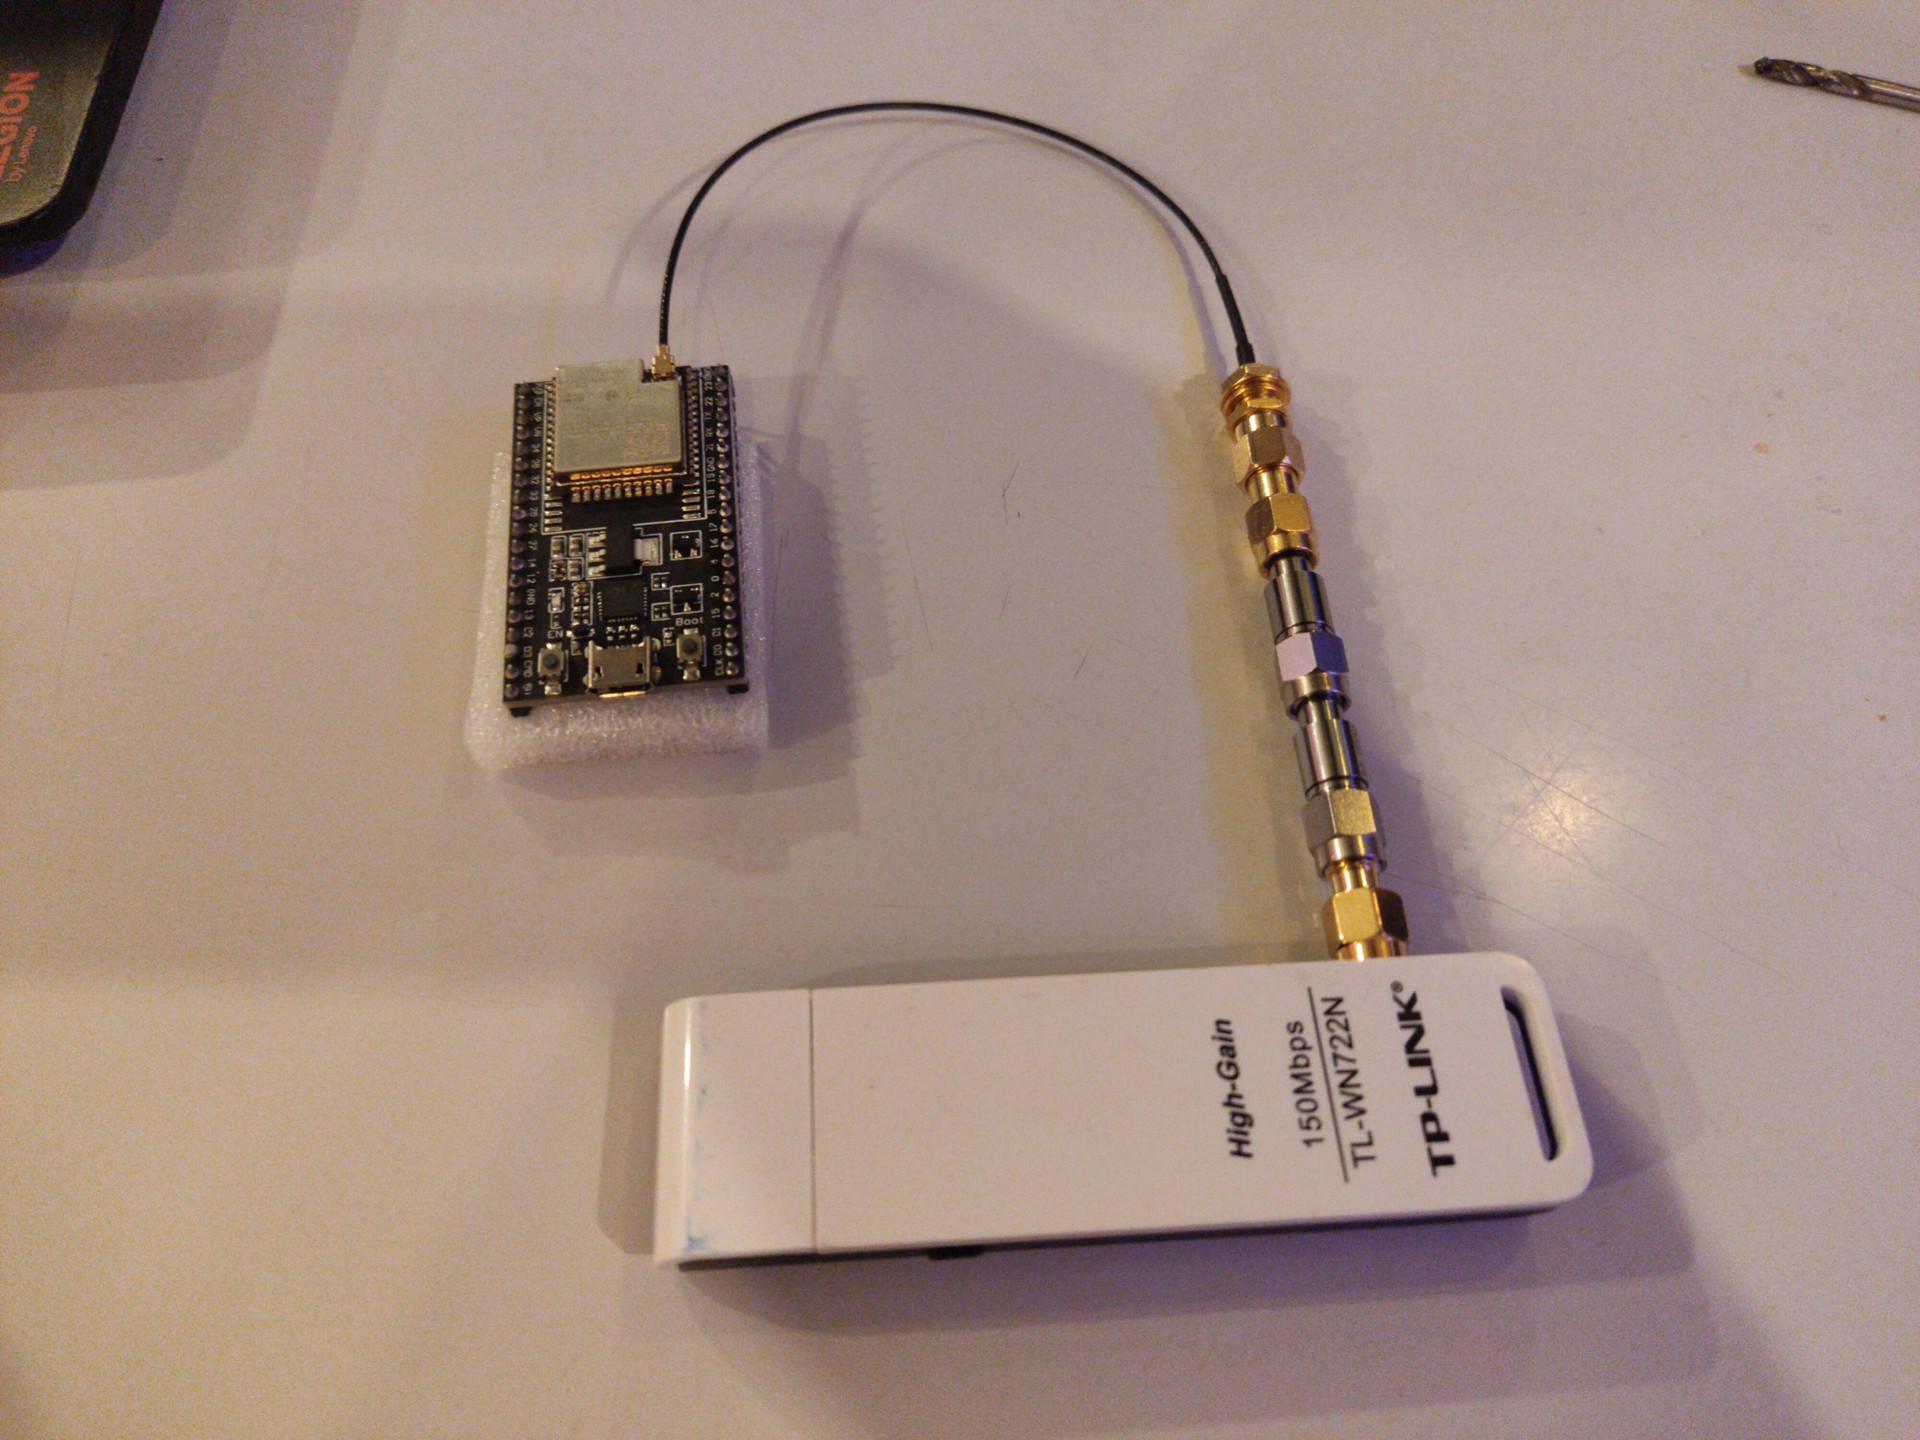 Wi-Fi dongle connected to the ESP32, with two 30&nbsp;dB attenuators in between